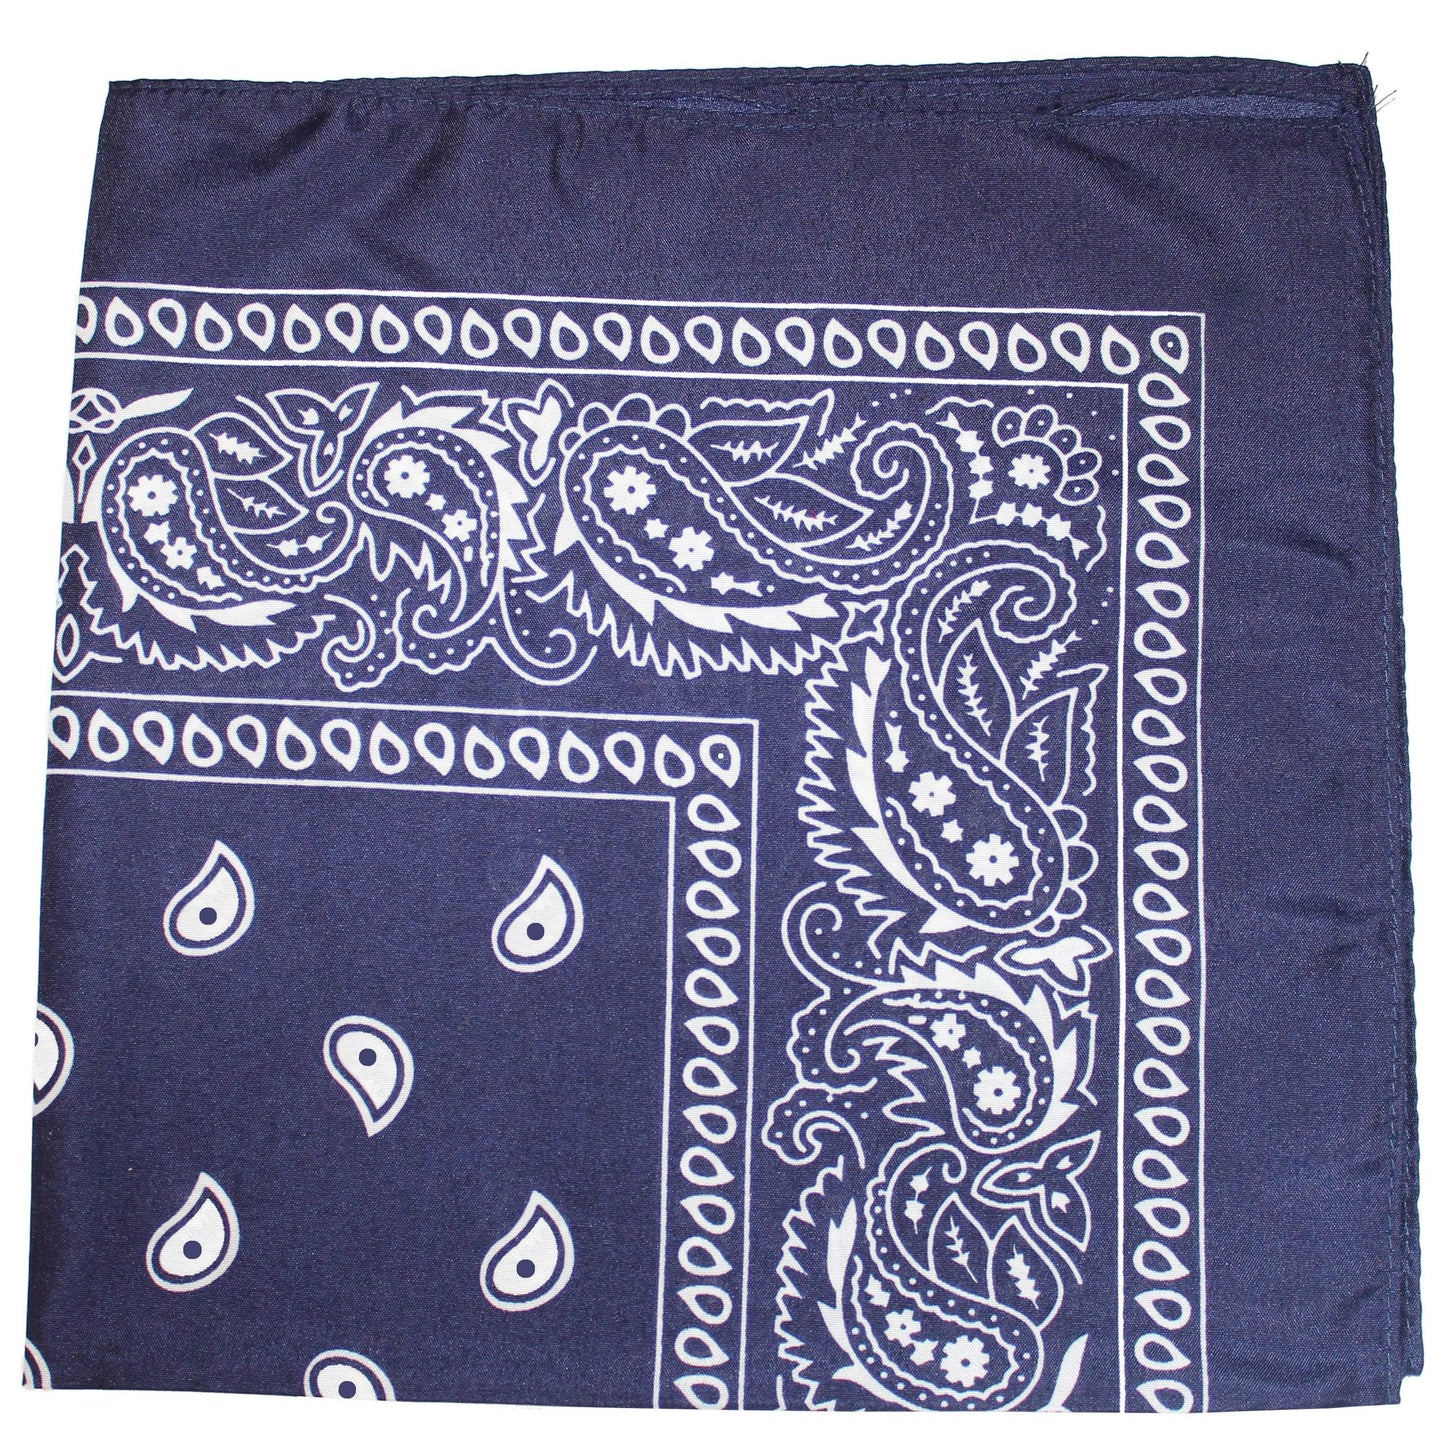 Pack of 4 X-Large Paisley Cotton Printed Bandana - 27 x 27 inches